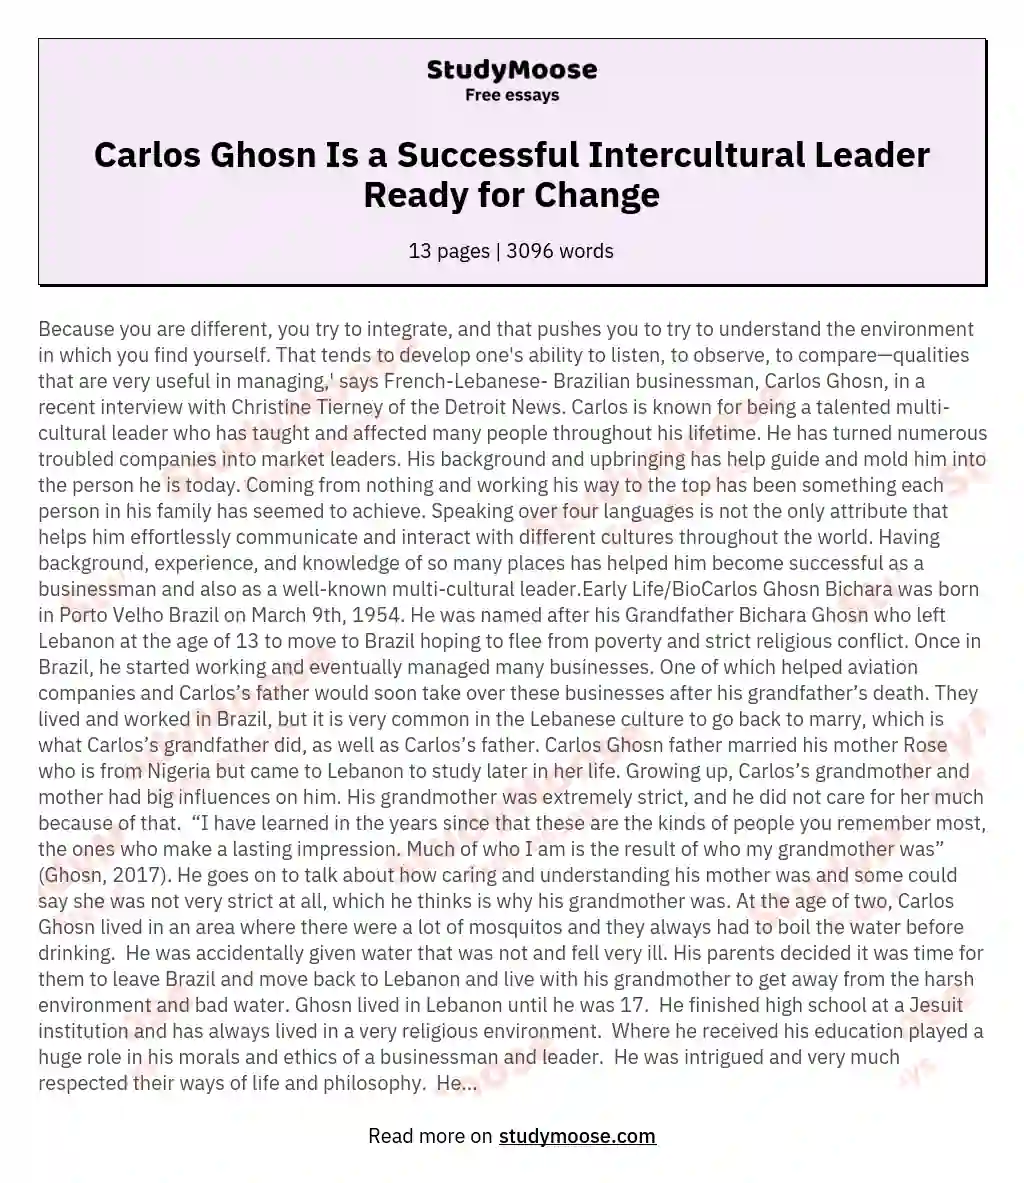 Carlos Ghosn Is a Successful Intercultural Leader Ready for Change essay